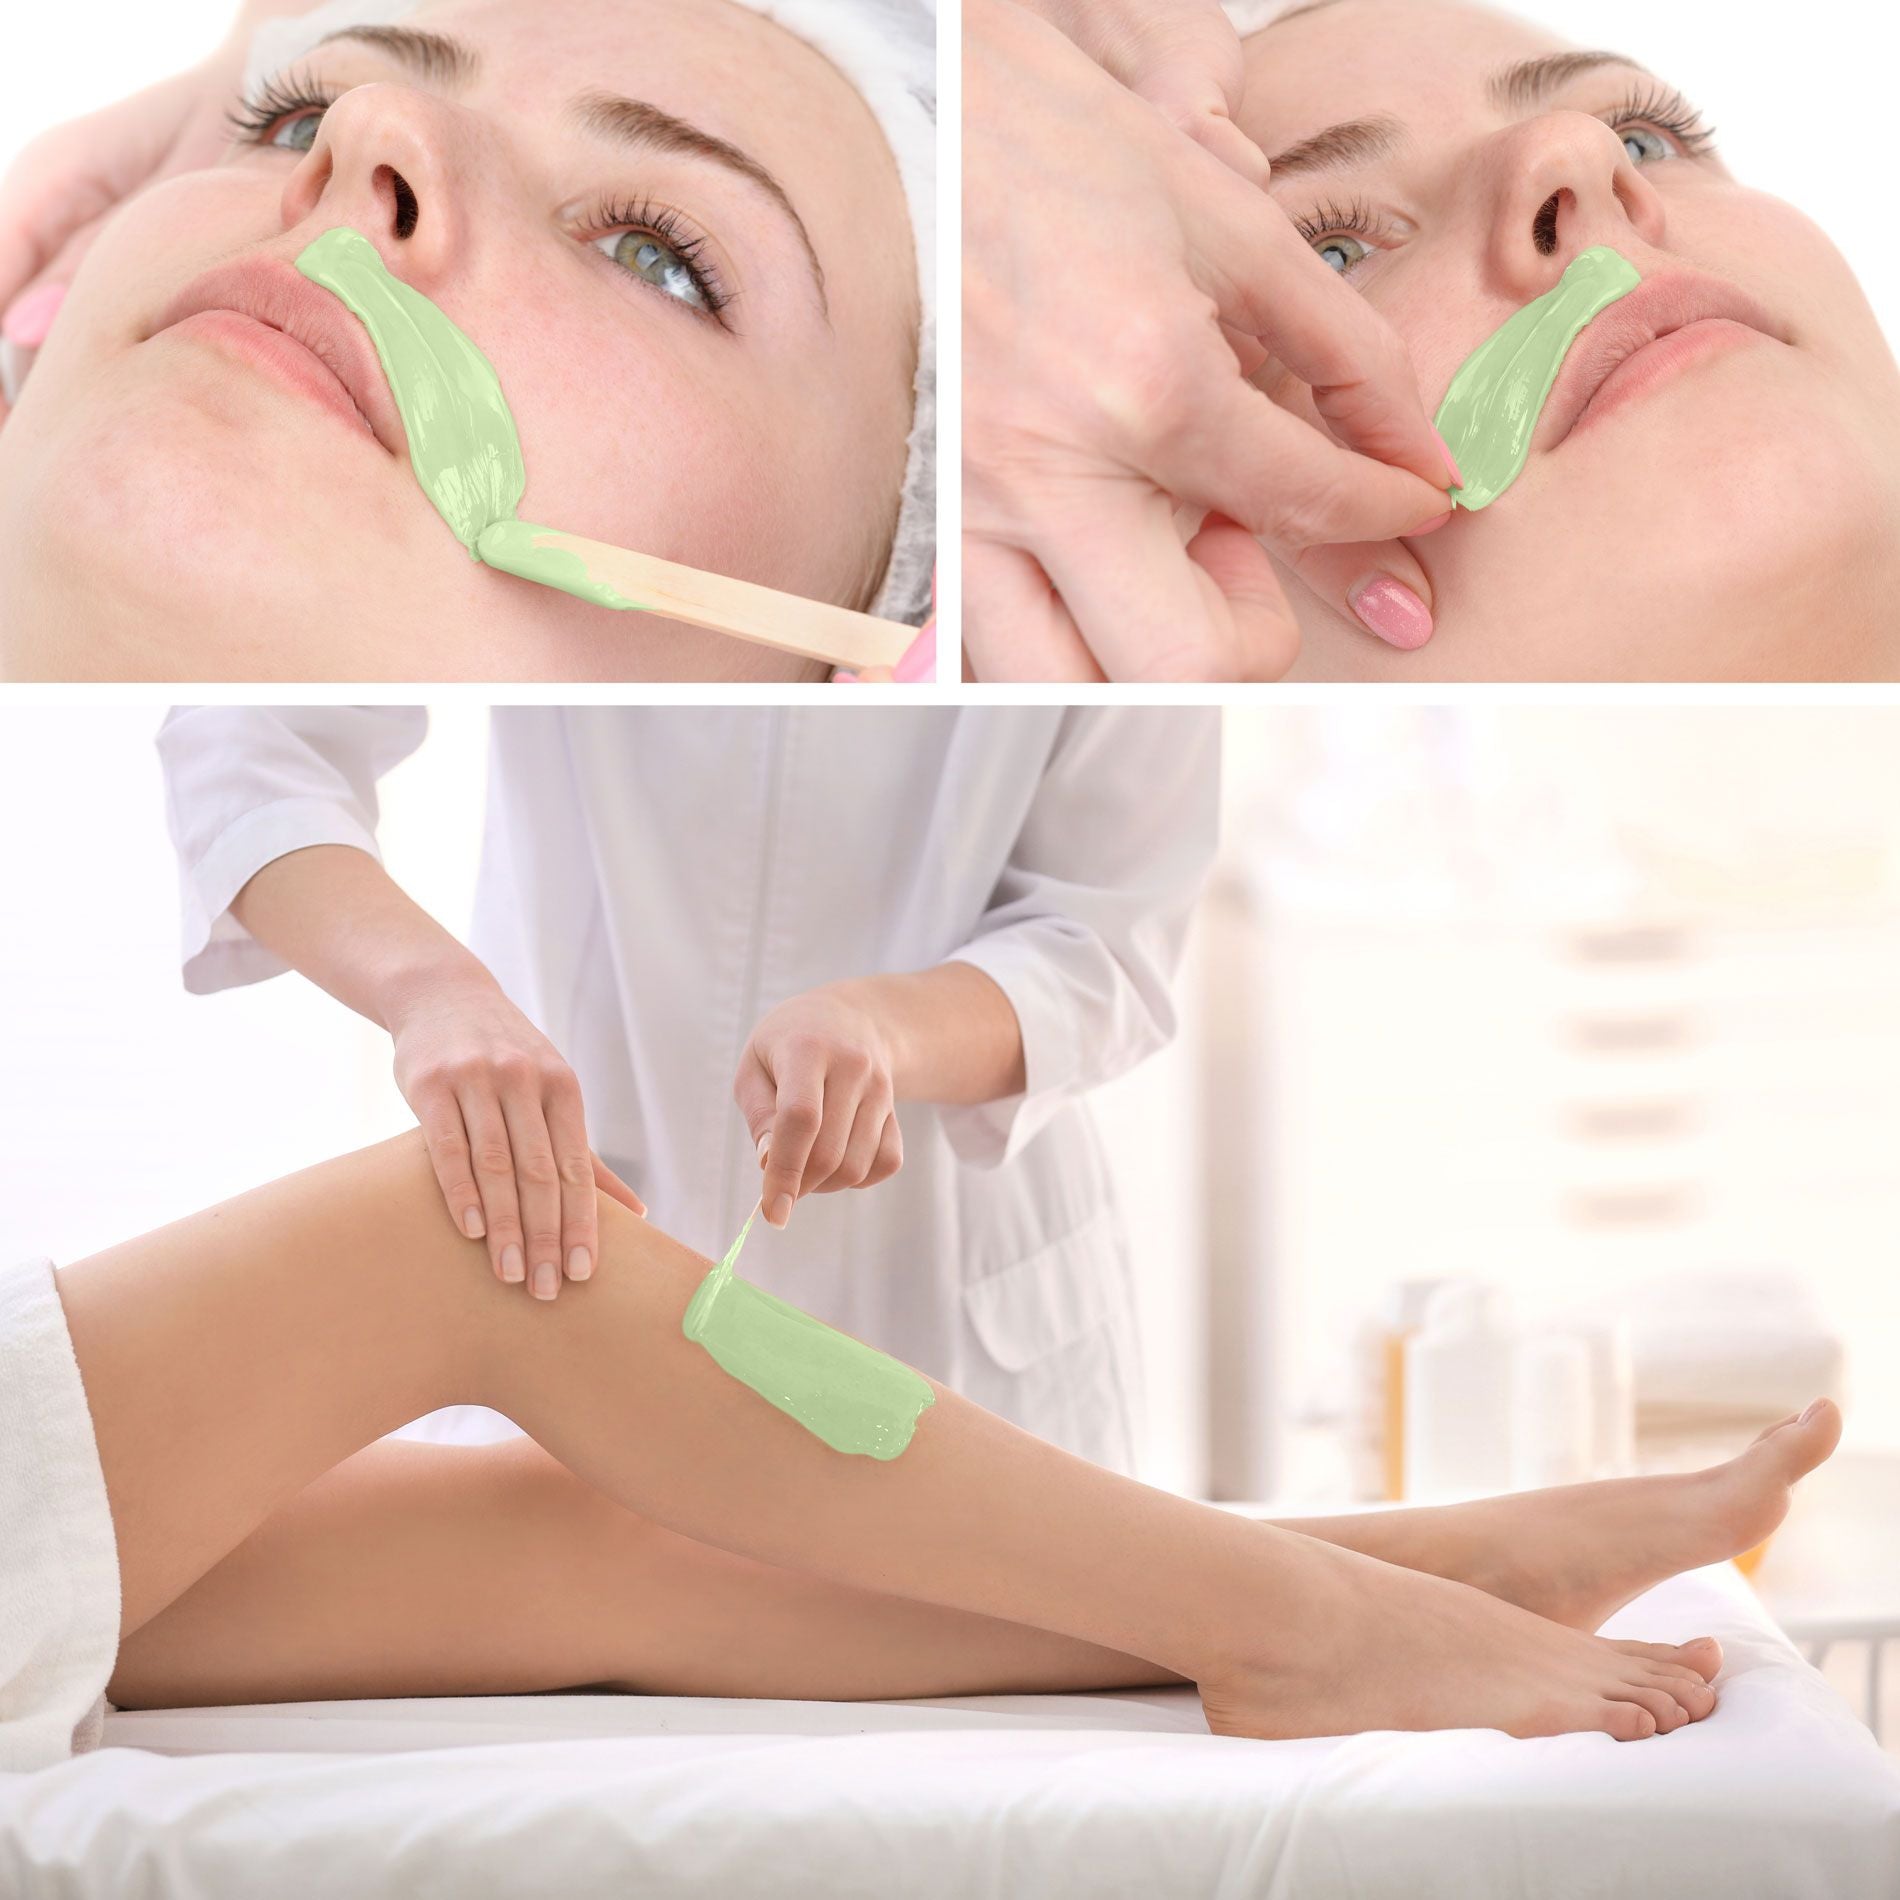 various images of lady having upperlip and legs waxed with green tea wax